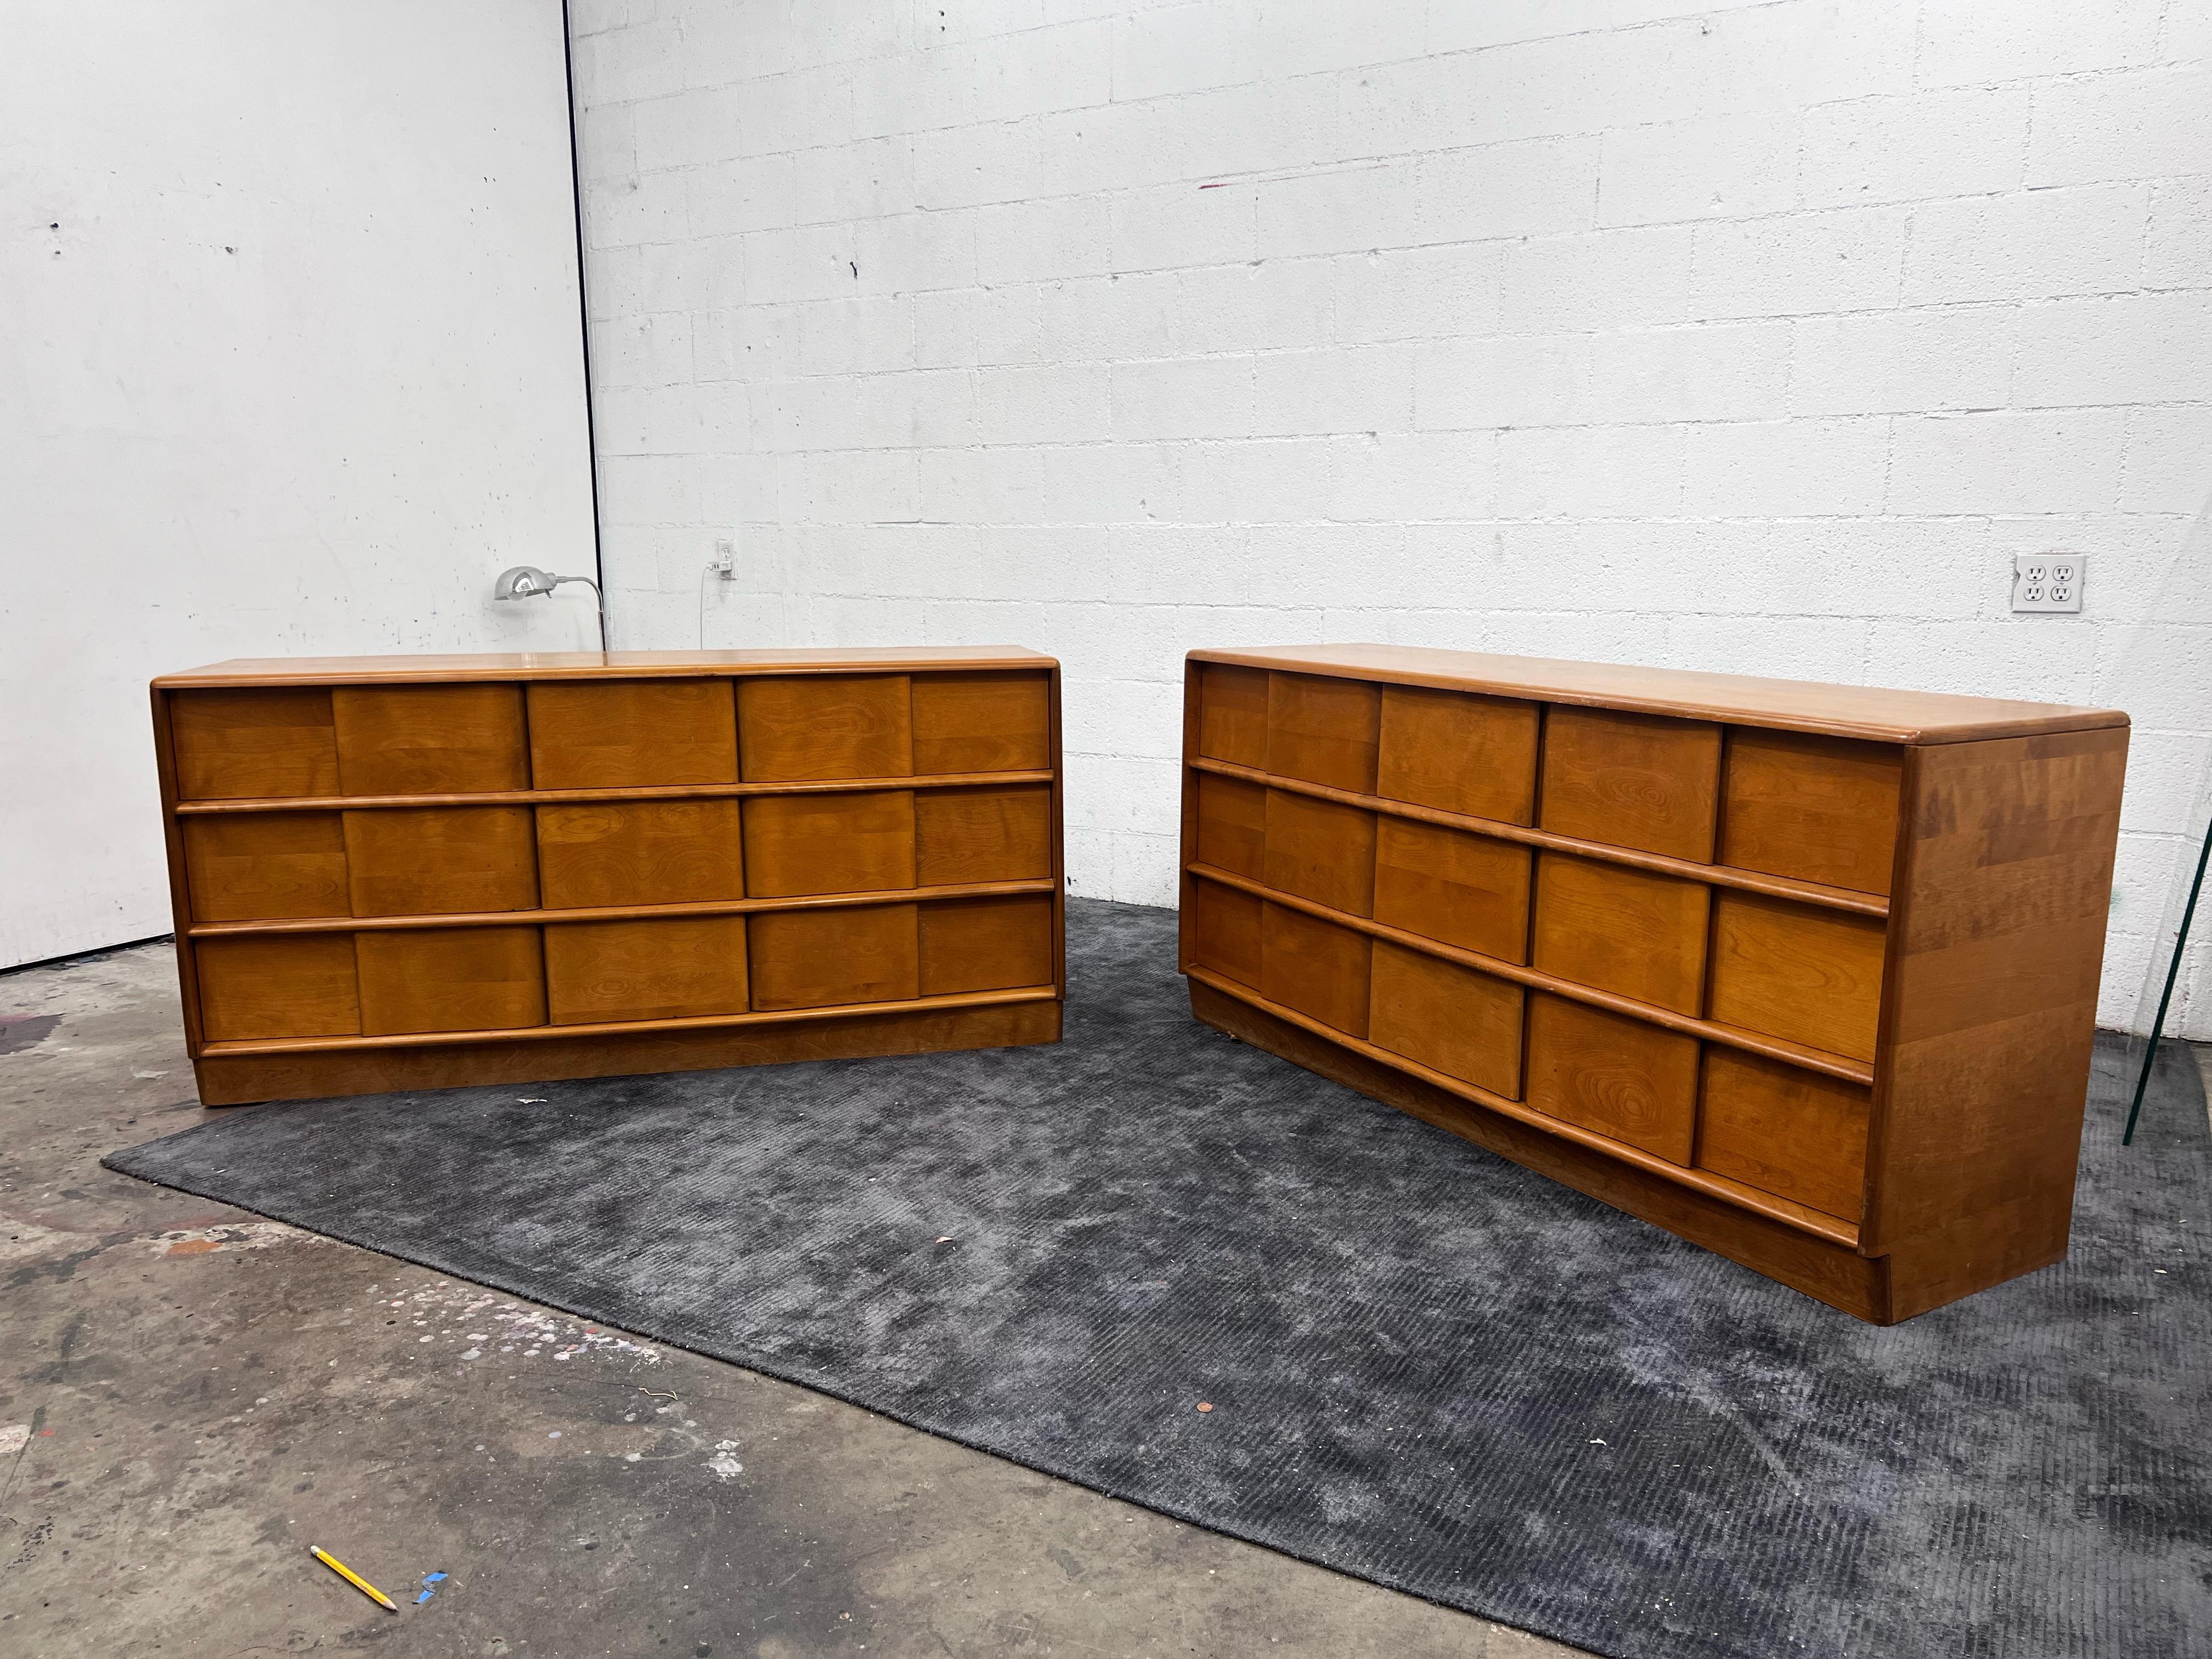 Two available. 
Beautifully designed large 9 drawer dresser with a wavy front, lots of storage, and easy to open drawers that glide smoothly. 

The original finish has aged to a dark amber/ tobacco color.

The Heywood Wakefield’s makers mark